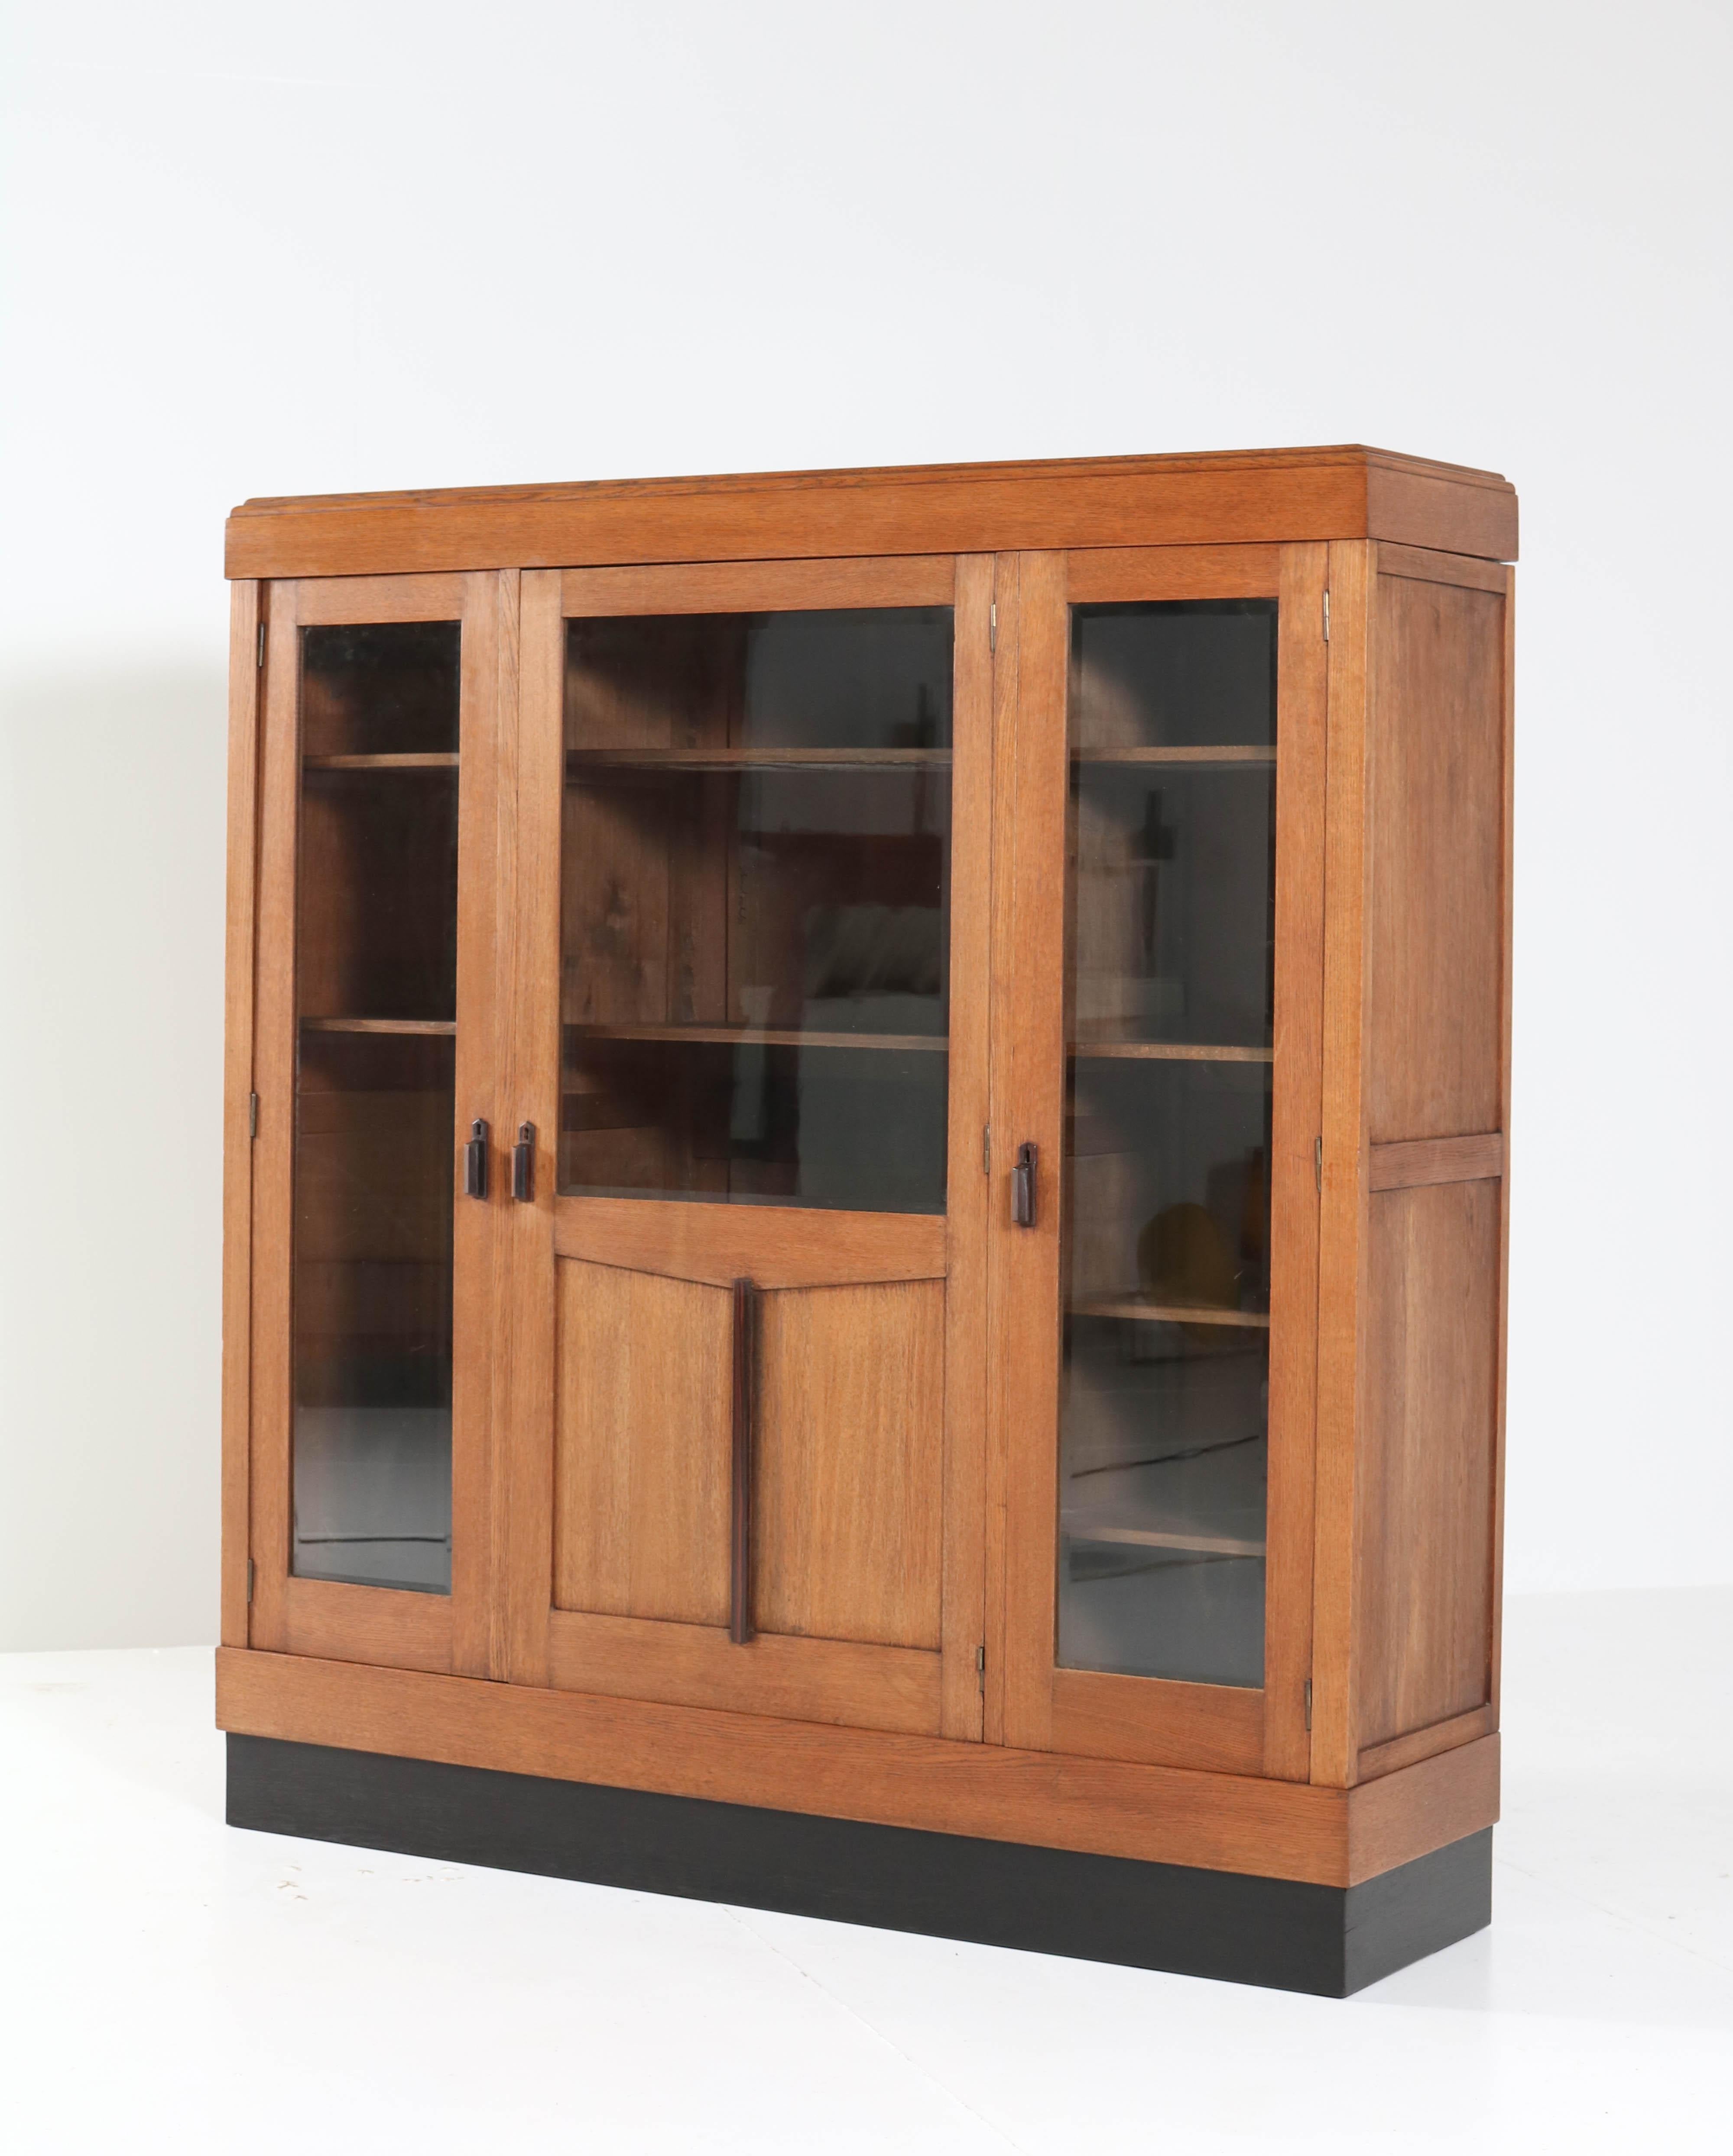 Early 20th Century Dutch Oak Art Deco Haagse School Bookcase with Beveled Glass, 1920s